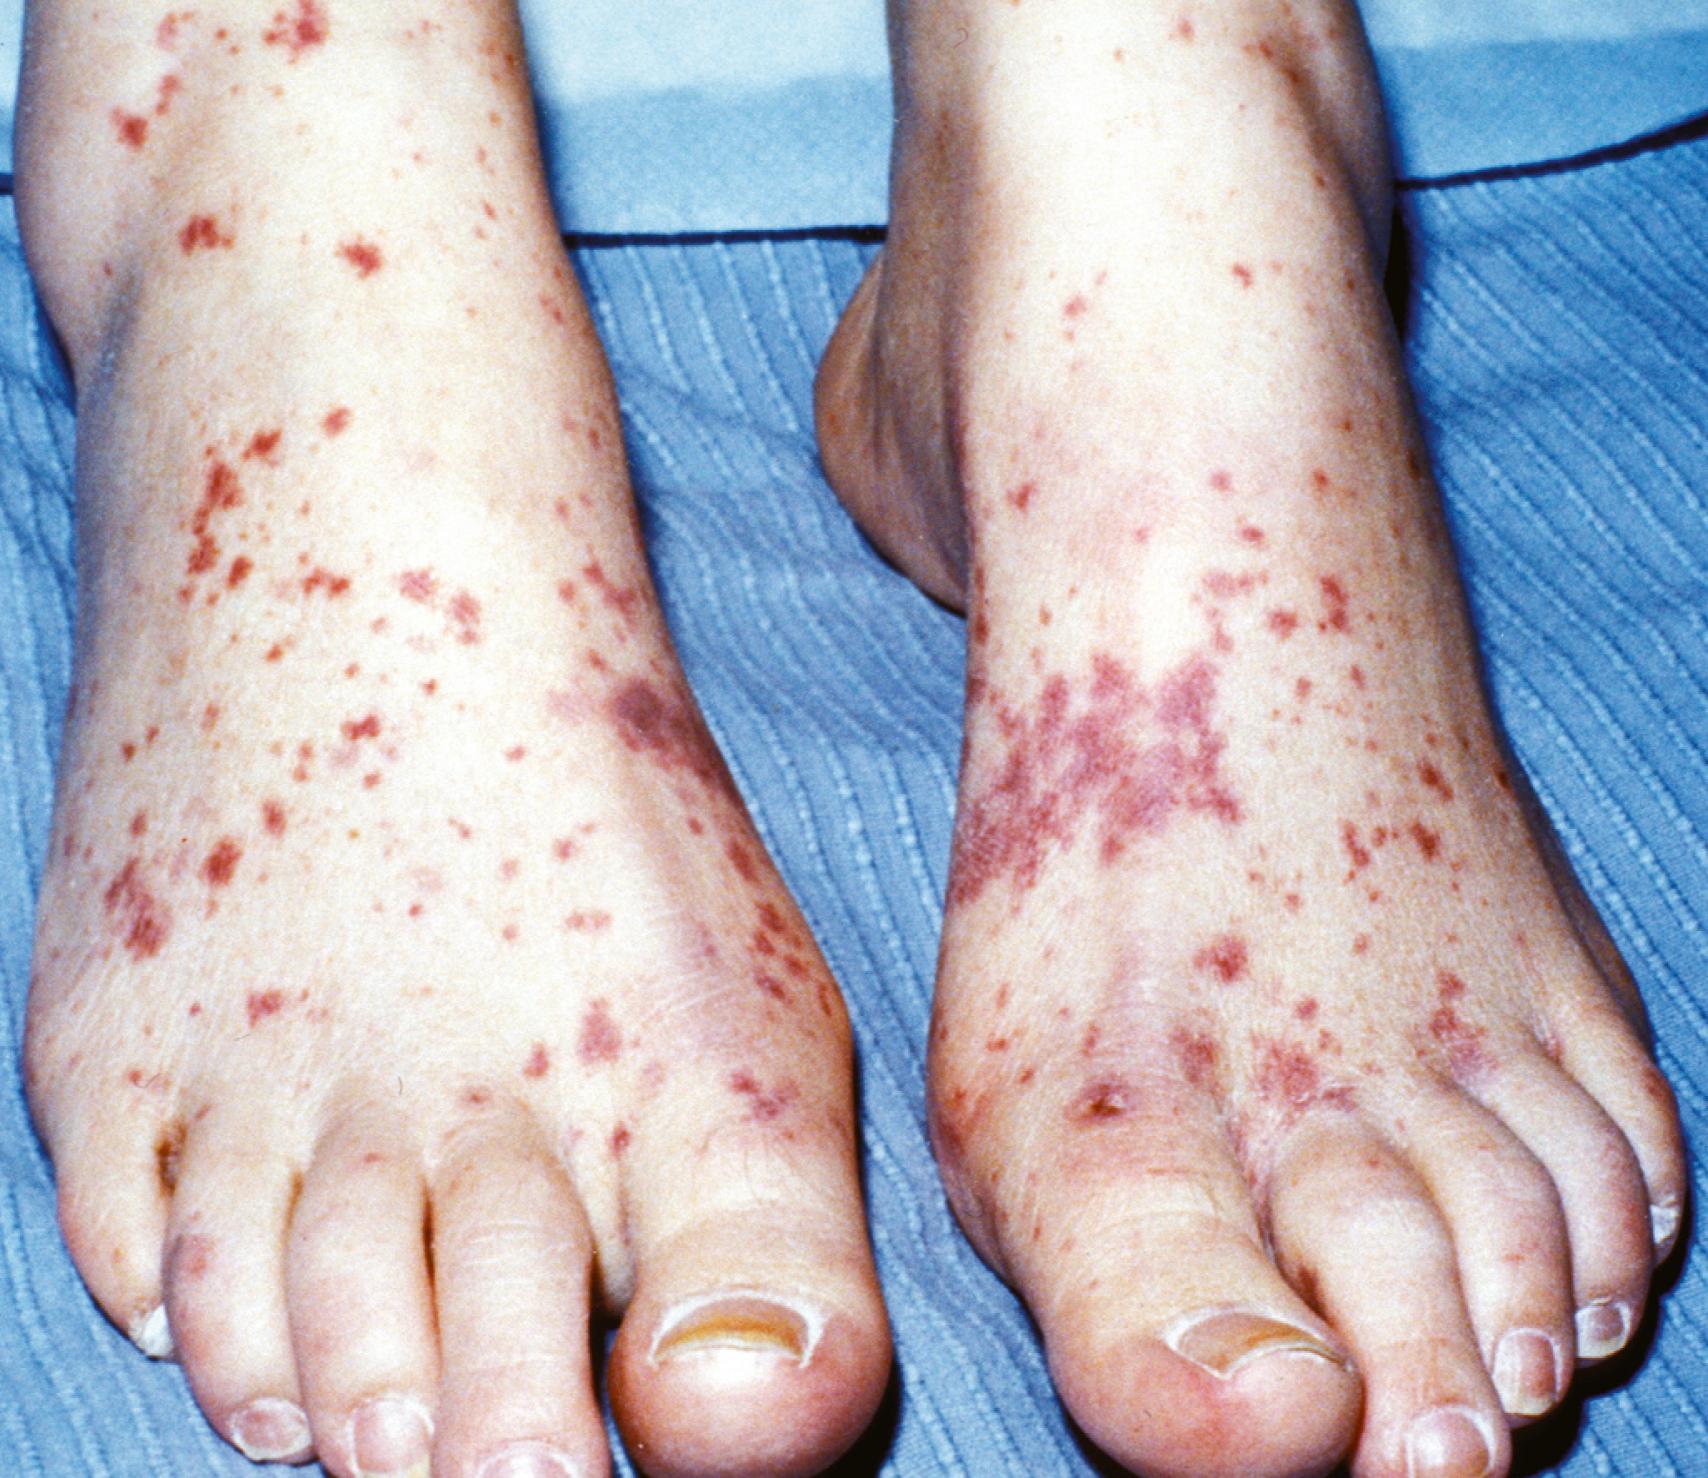 Fig. 23.15, Vasculitic purpura in a teenage girl with an acute exacerbation of systemic lupus erythematosus.